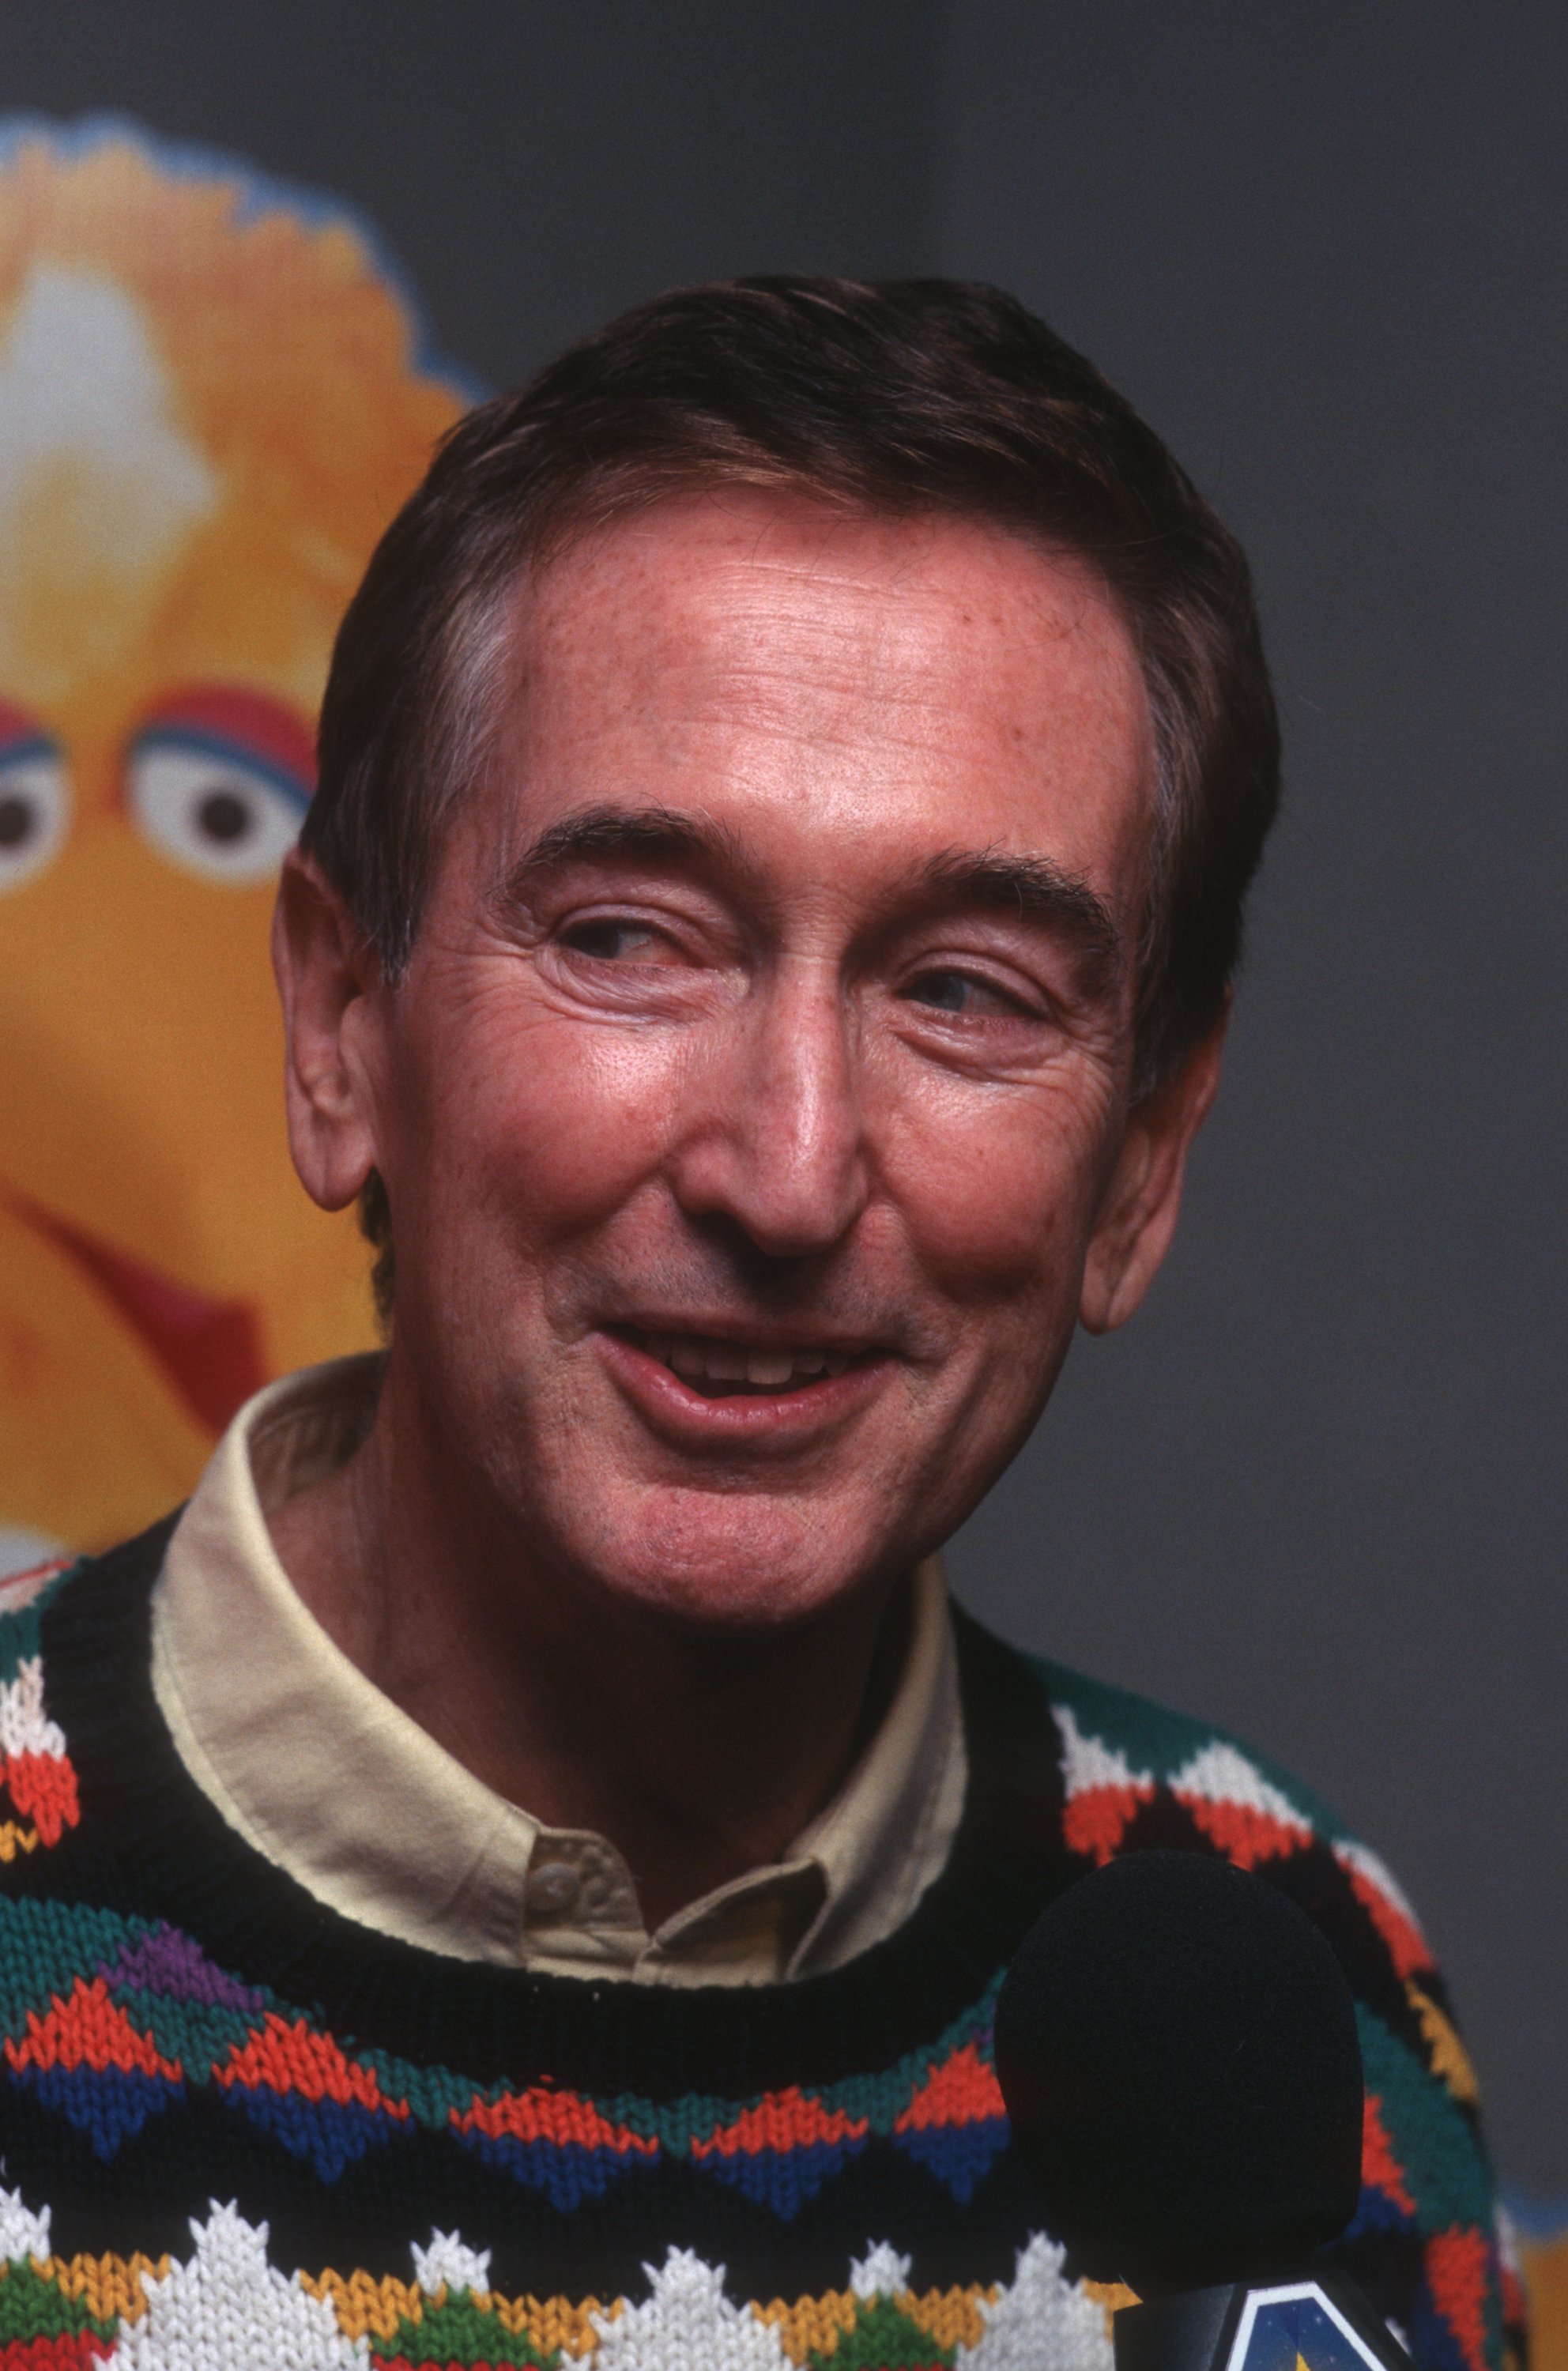 Bob McGrath at the premiere of "Elmo Saves Christmas" on October 24, 1996, in New York City | Source: Getty Images